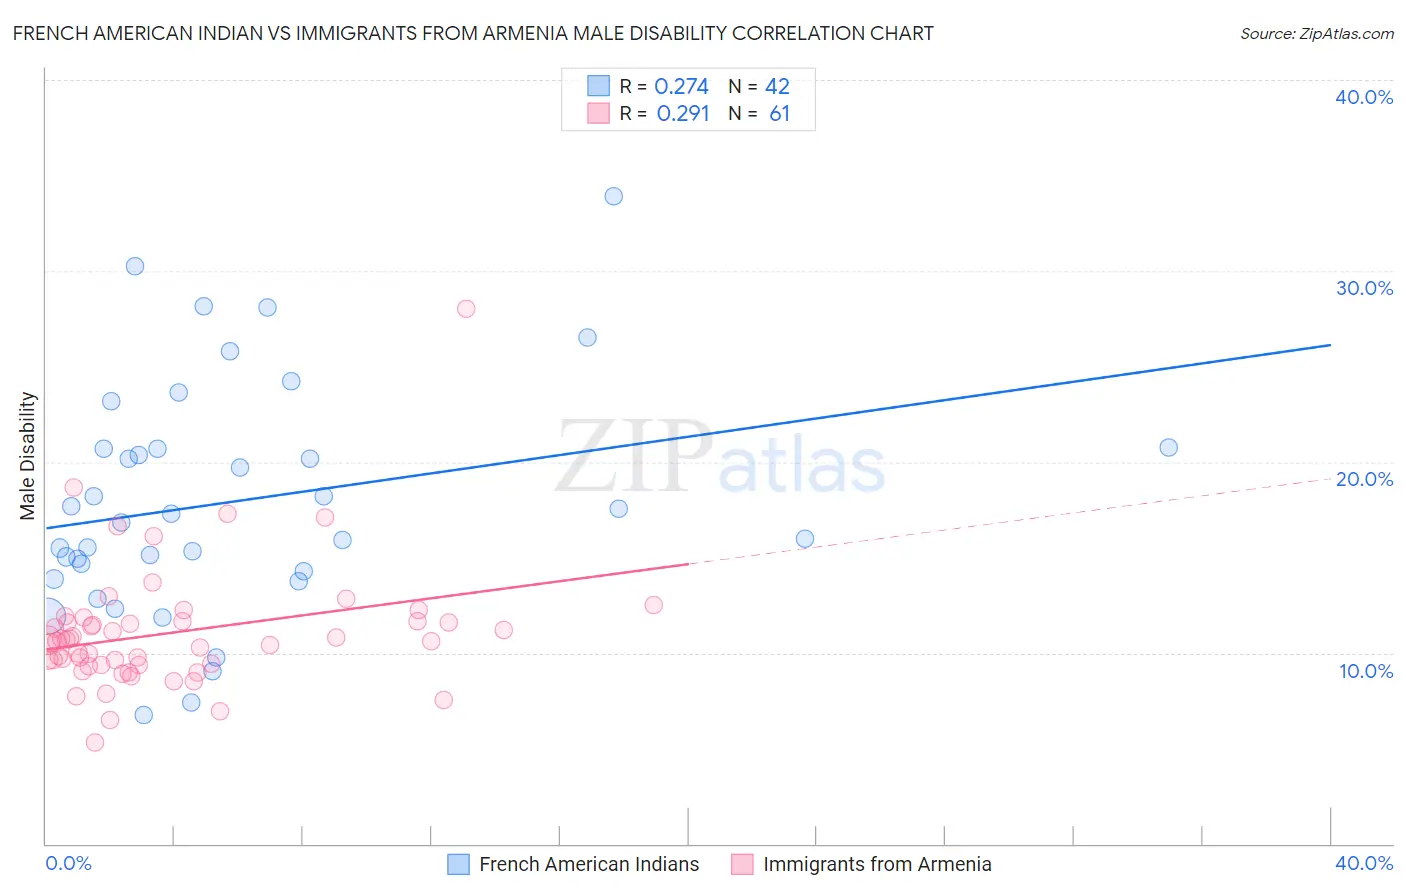 French American Indian vs Immigrants from Armenia Male Disability